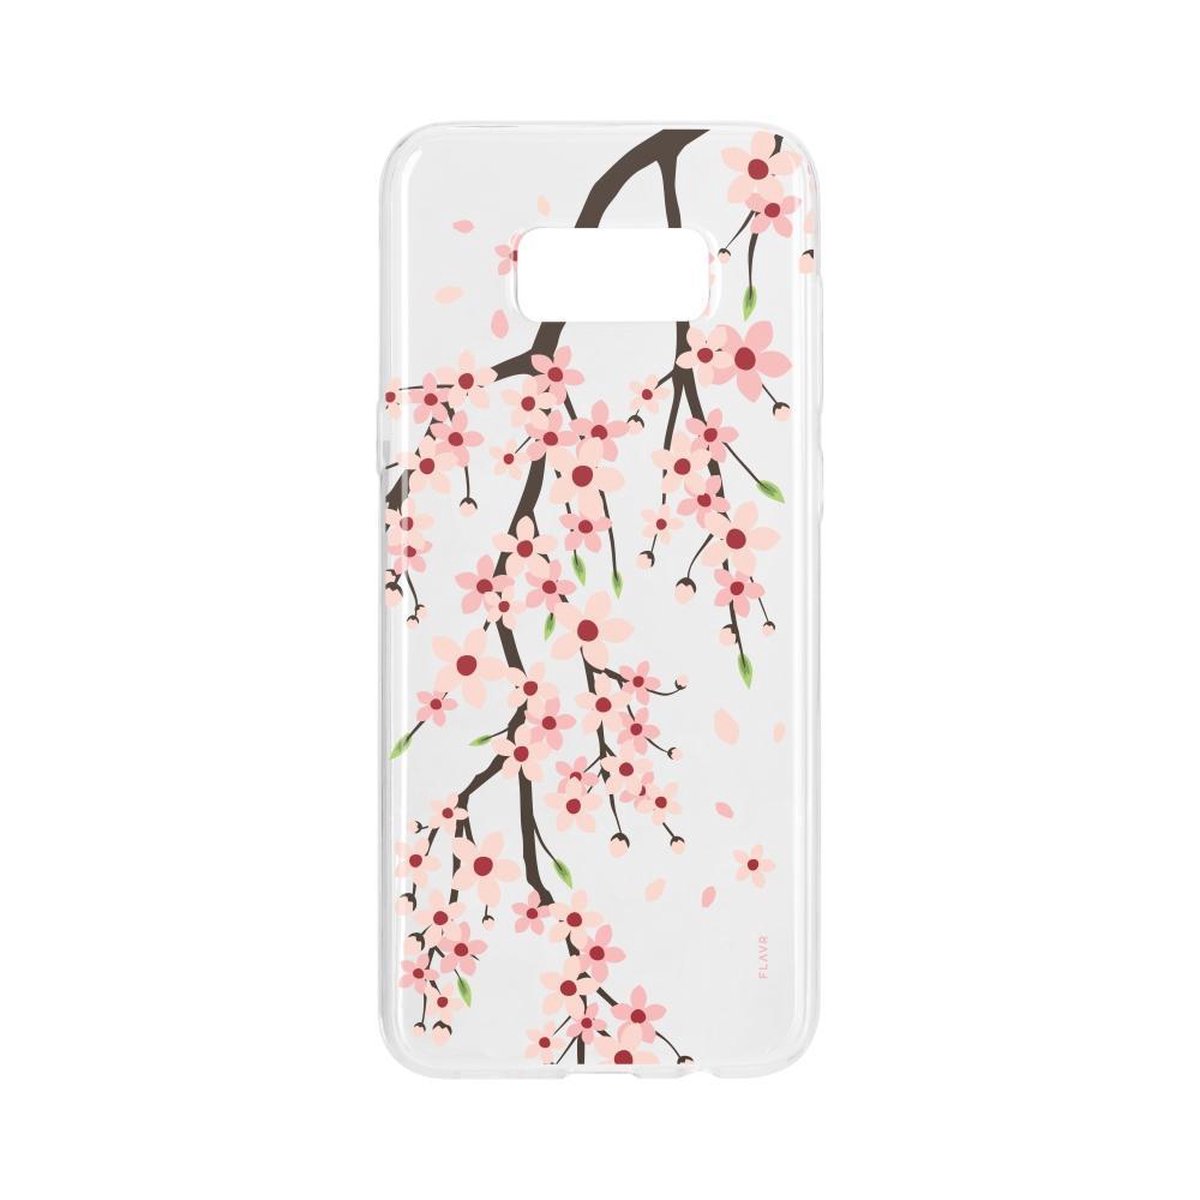 FLAVR iPlate Cherry Blossom for Galaxy S8 Plus colourful